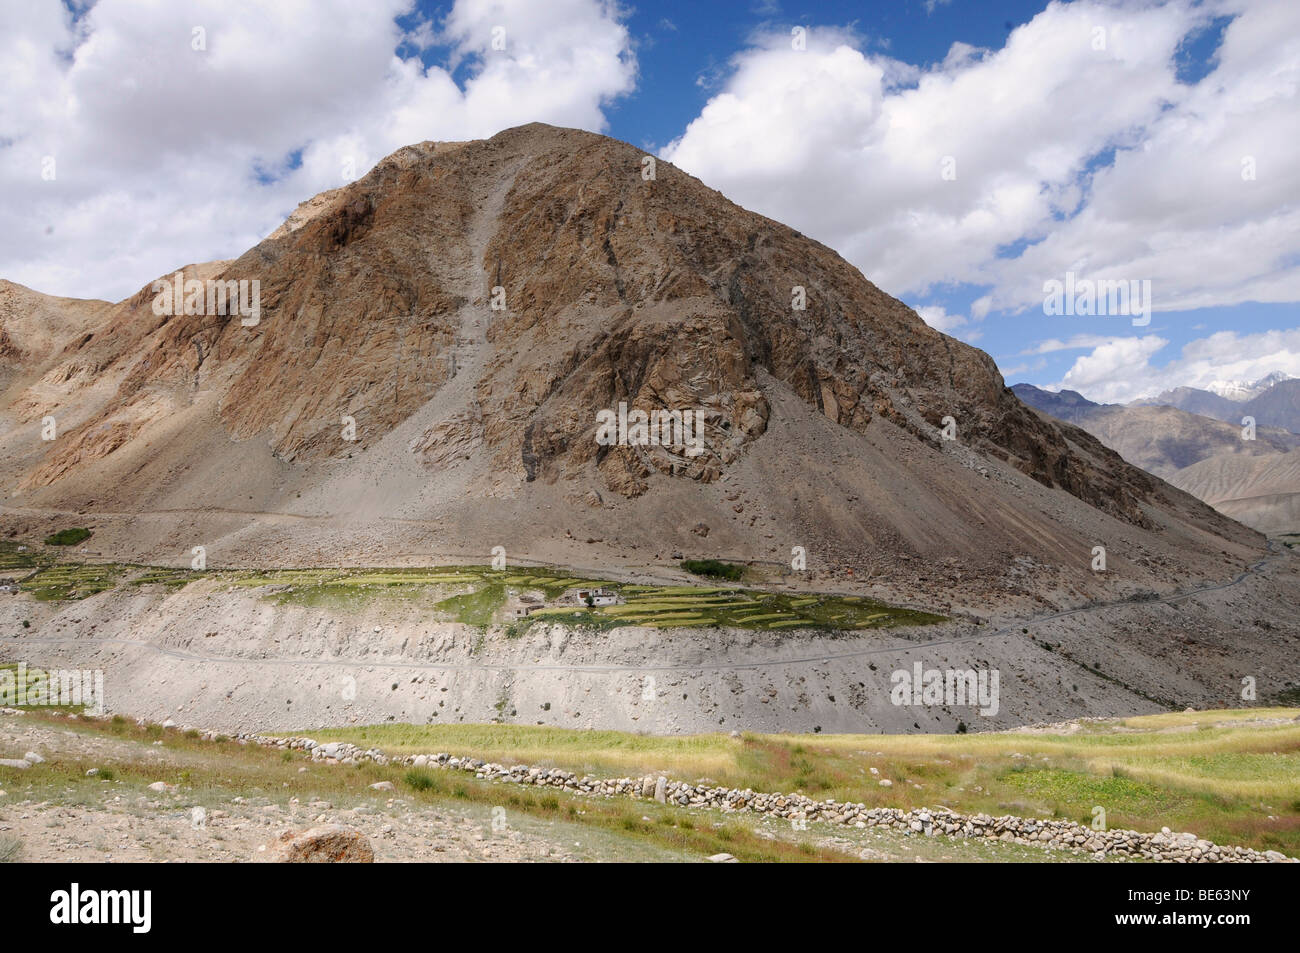 Oasis at the tributary of the Shyok river in the Nubra valley, barley crops cultivated at around 4000 m.a.s.l, Ladakh, Jammu an Stock Photo